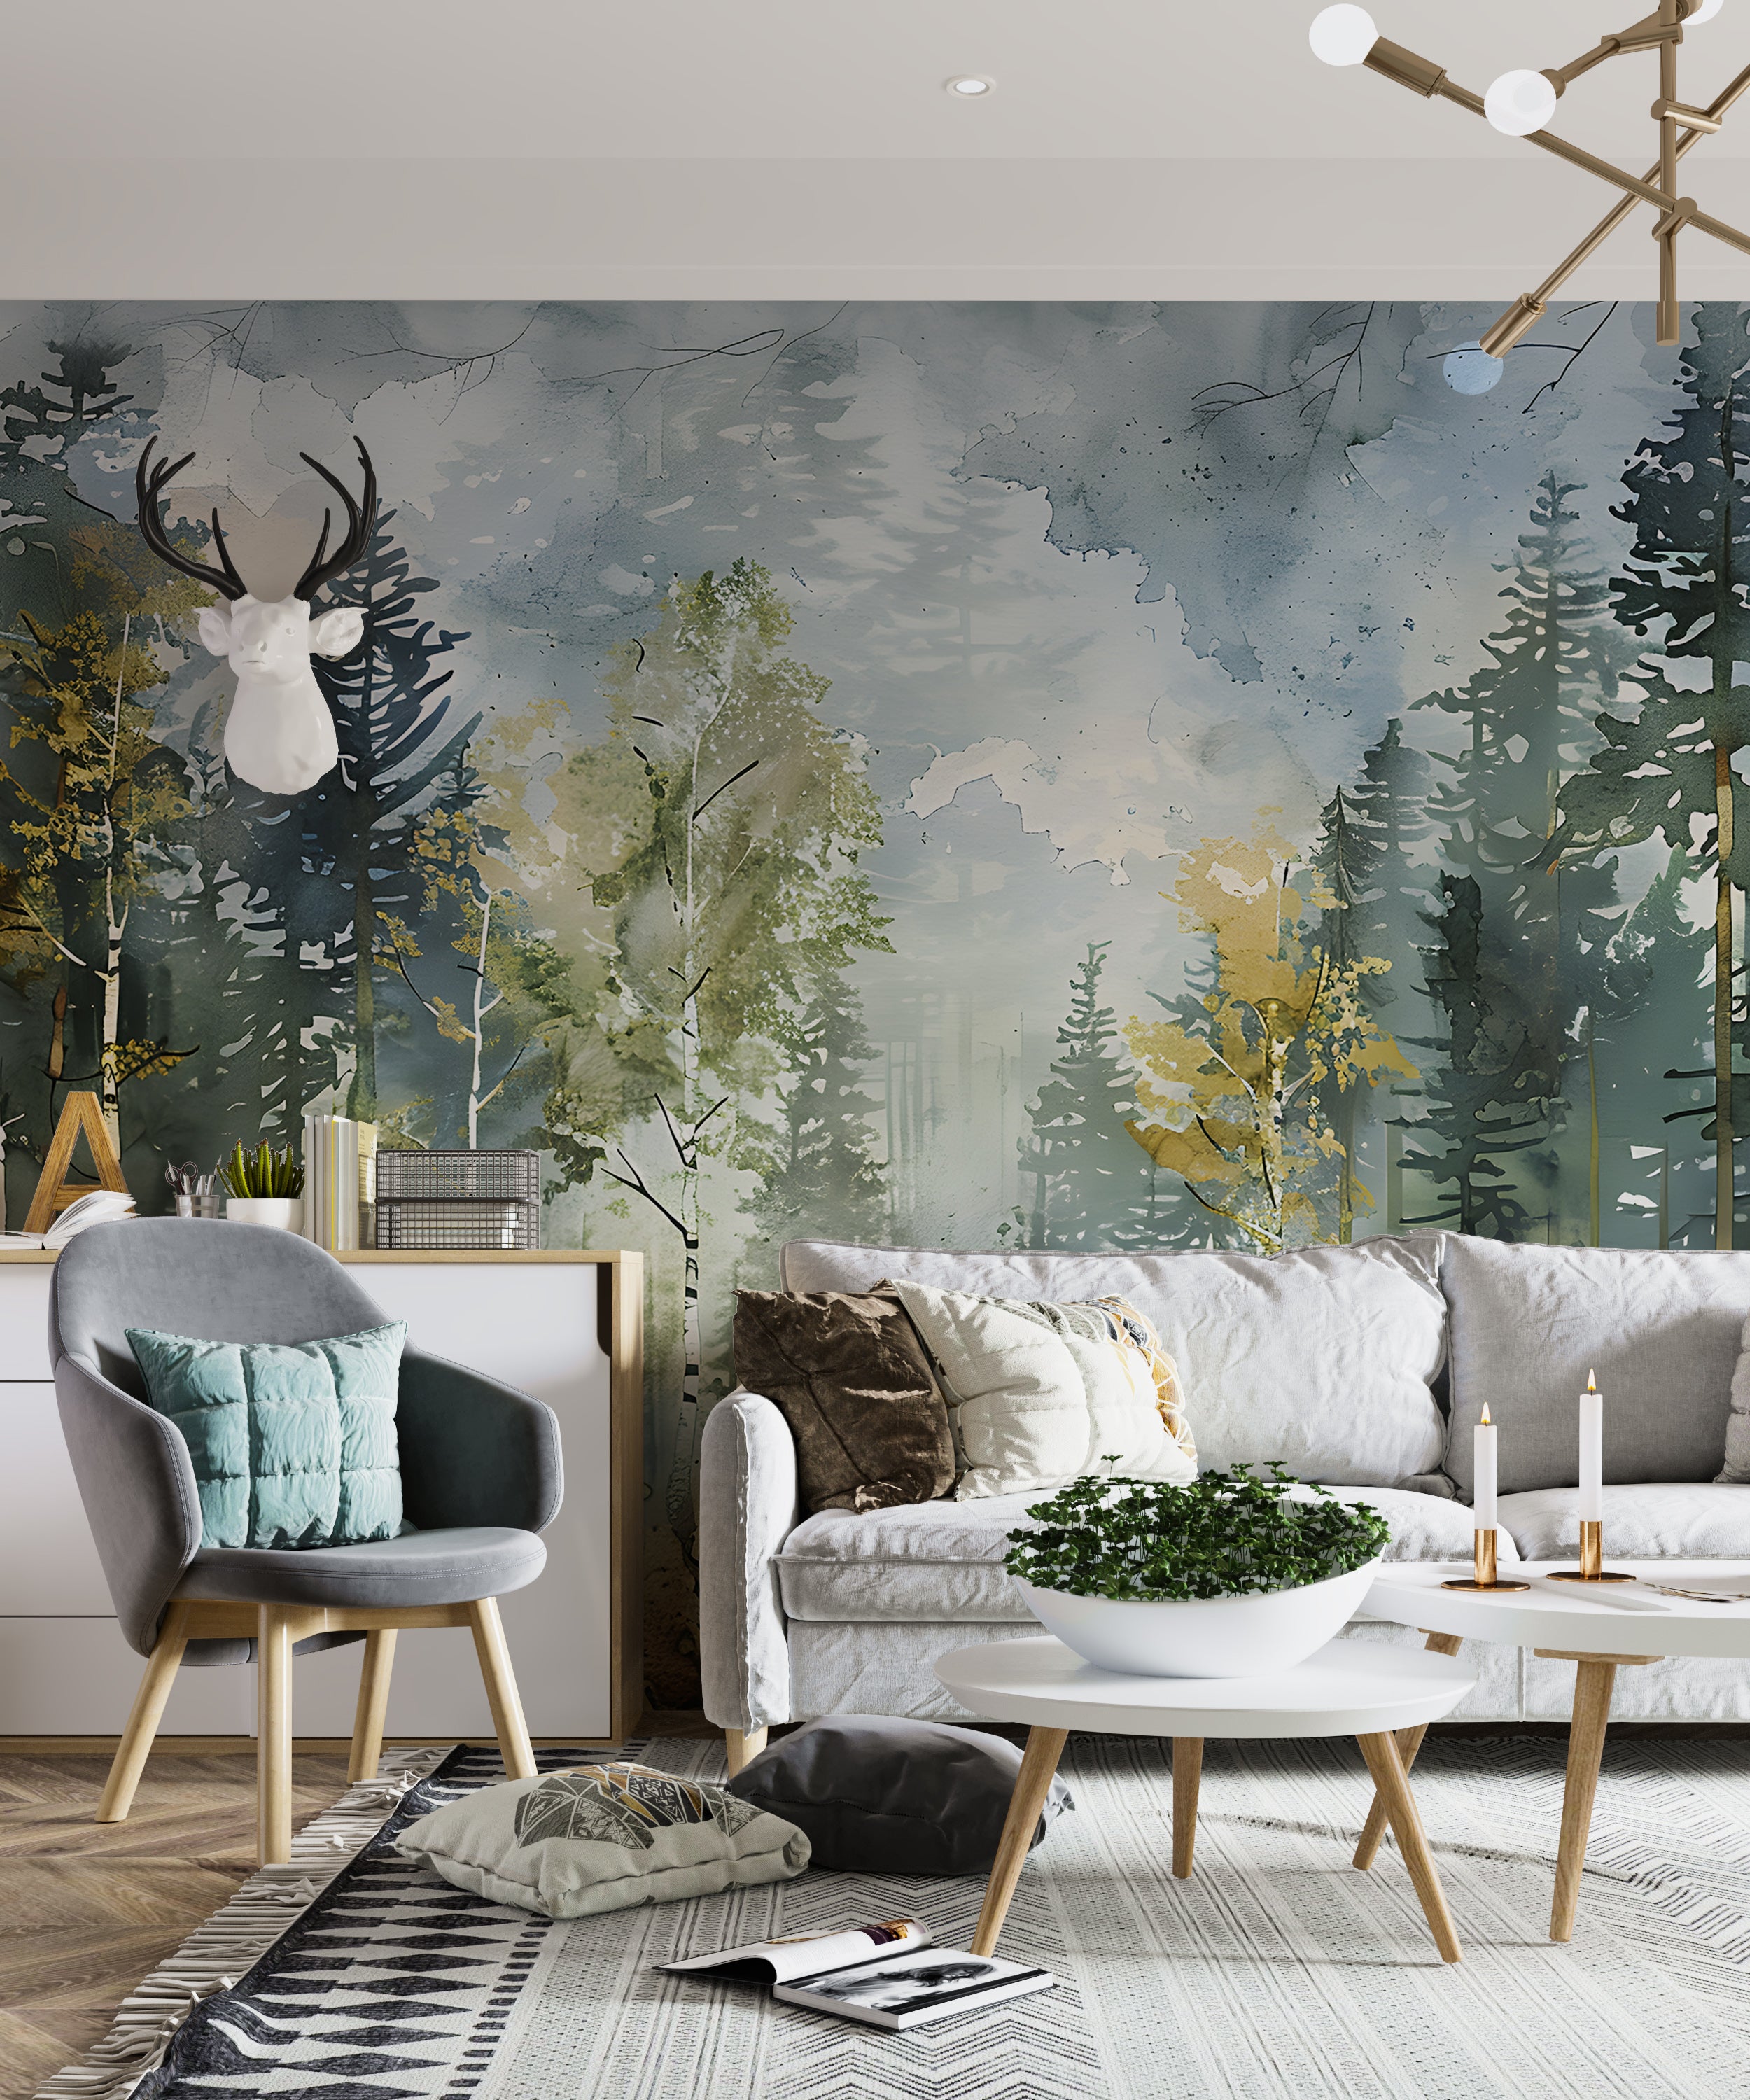 Birch Forest Wallpaper, Watercolor Woodland Mural, Pastel Colors Trees Wall Art, Peel and Stick Birches Decal, Removable Wild Nature Wallpaper